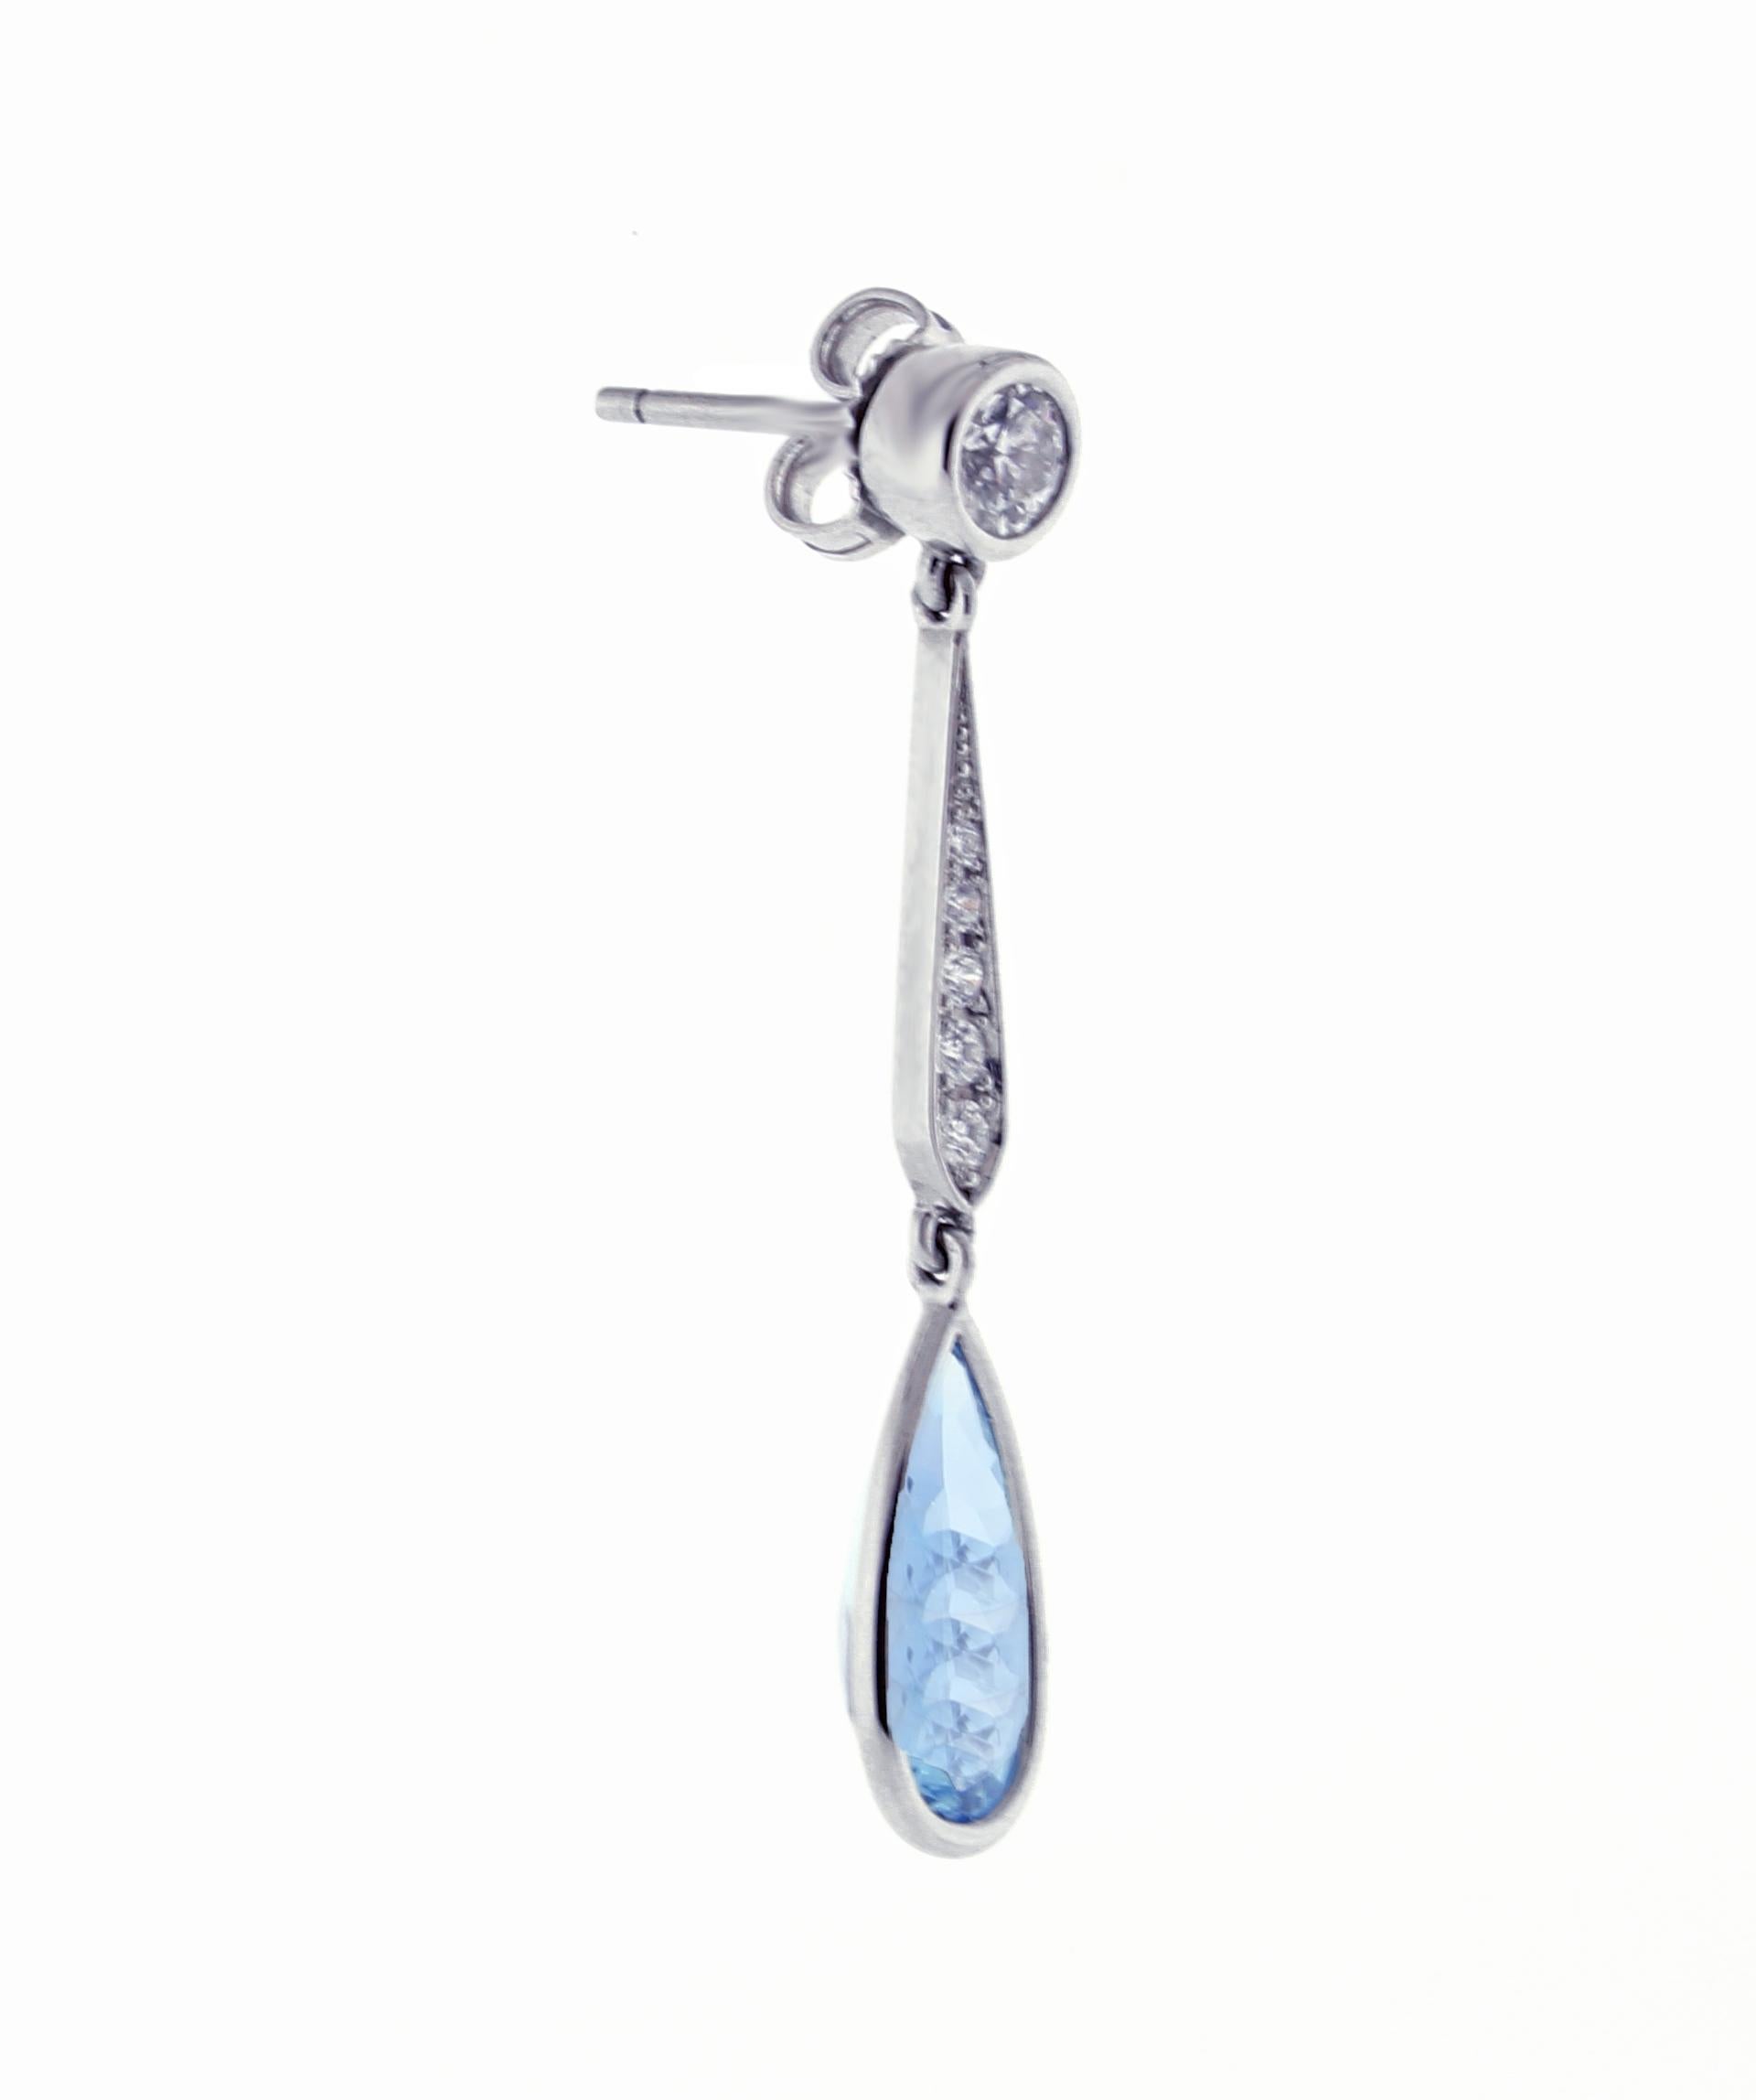  From Pampillonia Jewelers a pair of  teardrop aquamarine and diamond drop earrings
 ♦ Designer: Pampillonia
♦ Metal: Platinum
♦  2 Diamonds=.48 carat
♦ 10 Diamonds= 14 carats
♦ 2 Aquas=3.19
♦ Size  1 ½ inches long
♦ Packaging: Pampillonia